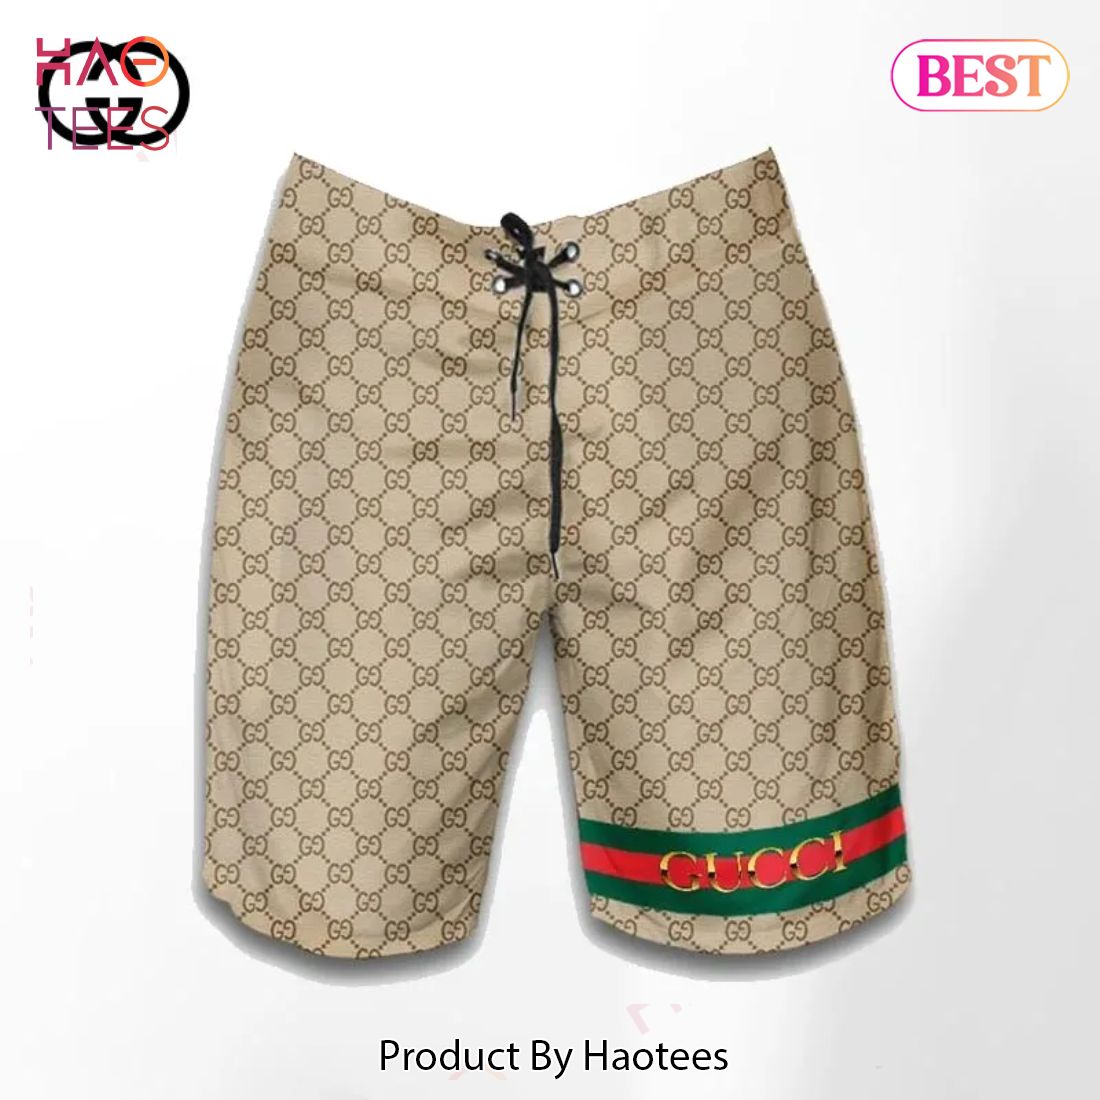 NEW Gucci Luxury Pants All Over Print Shorts Men